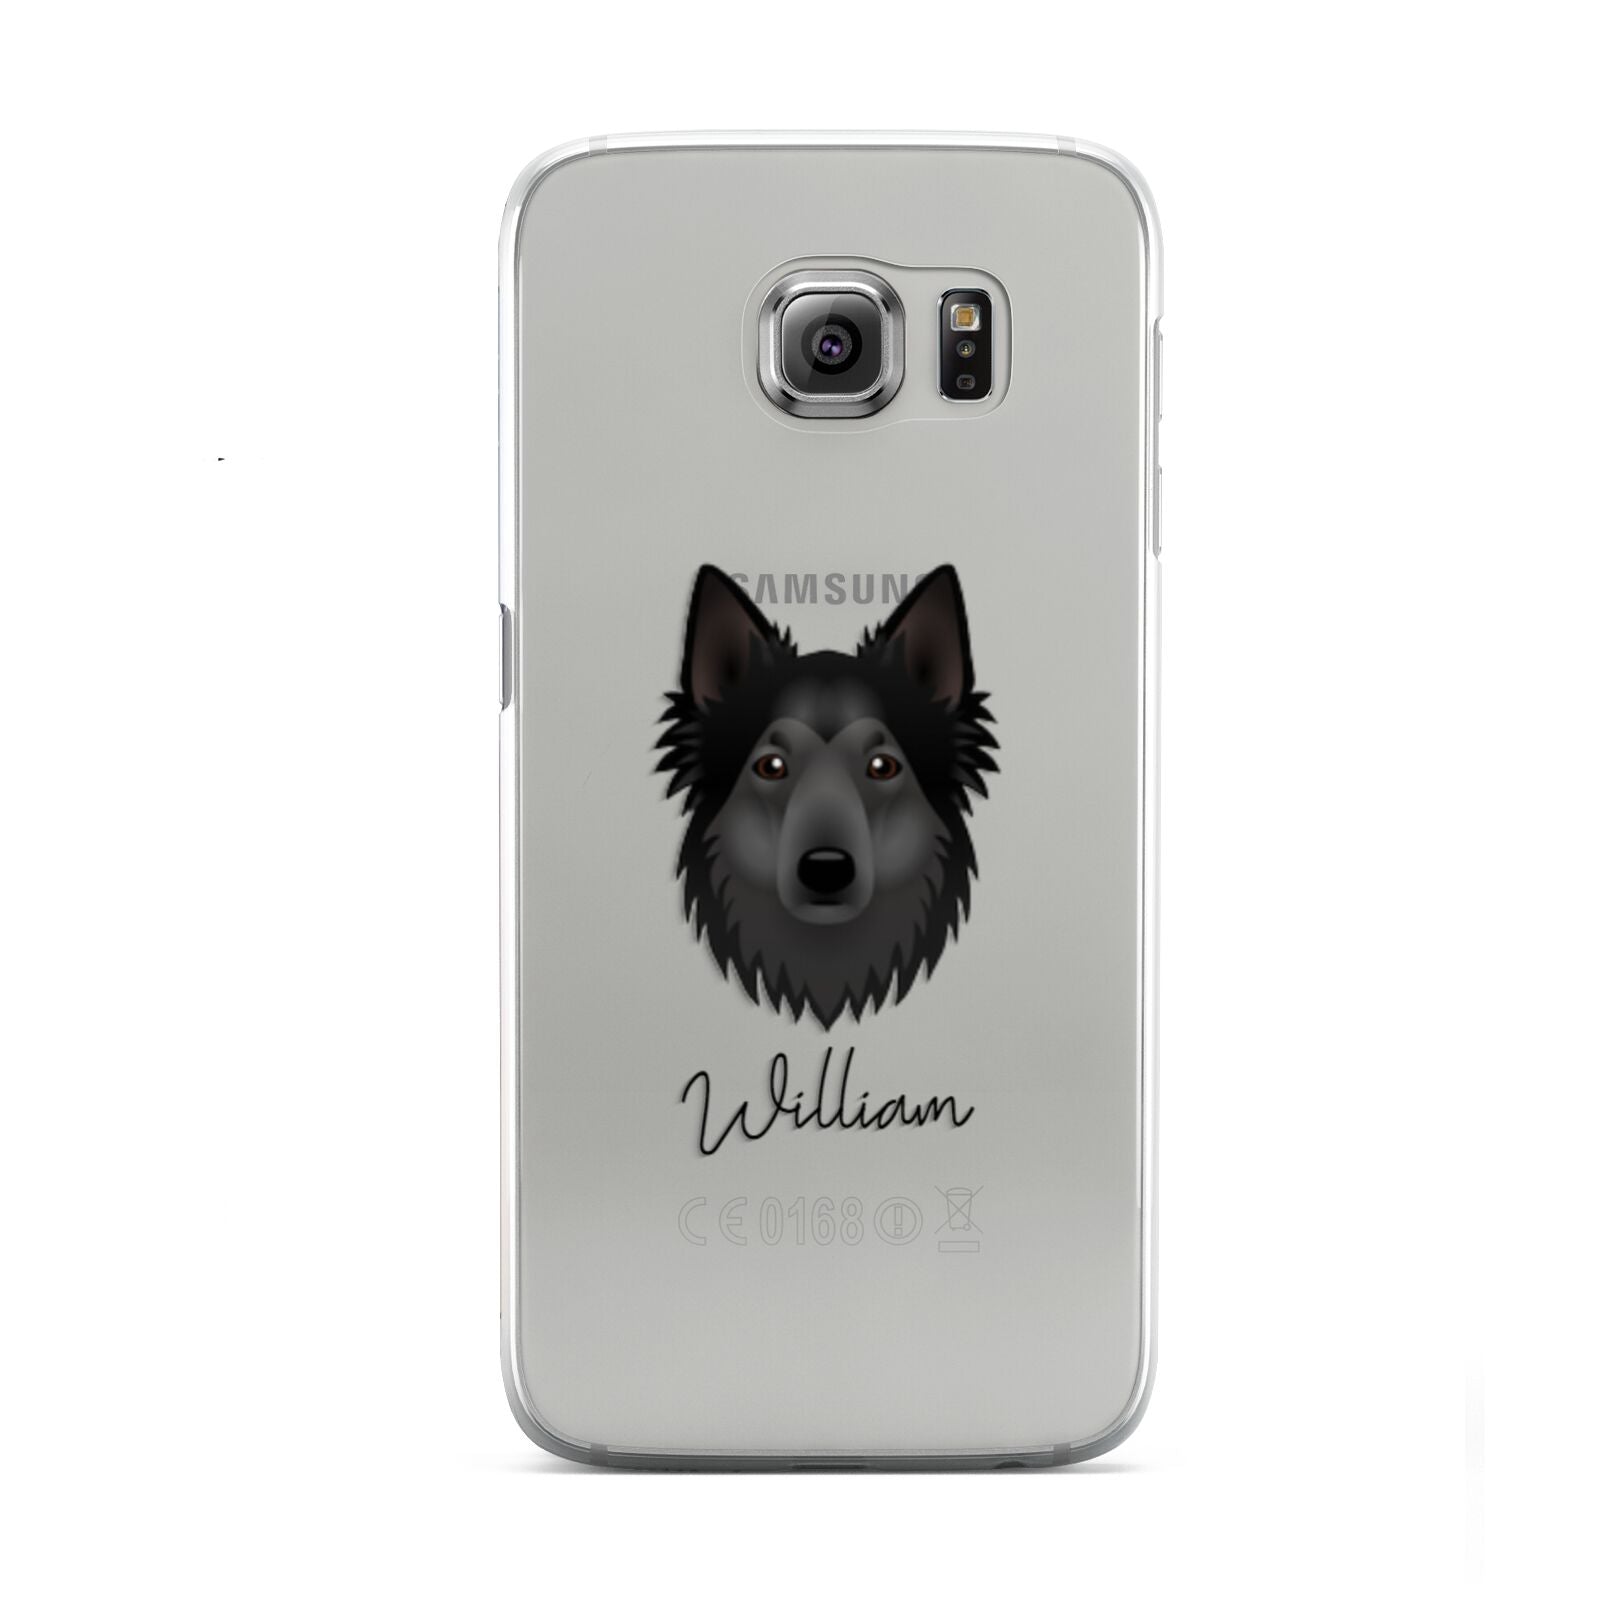 Shollie Personalised Samsung Galaxy S6 Case